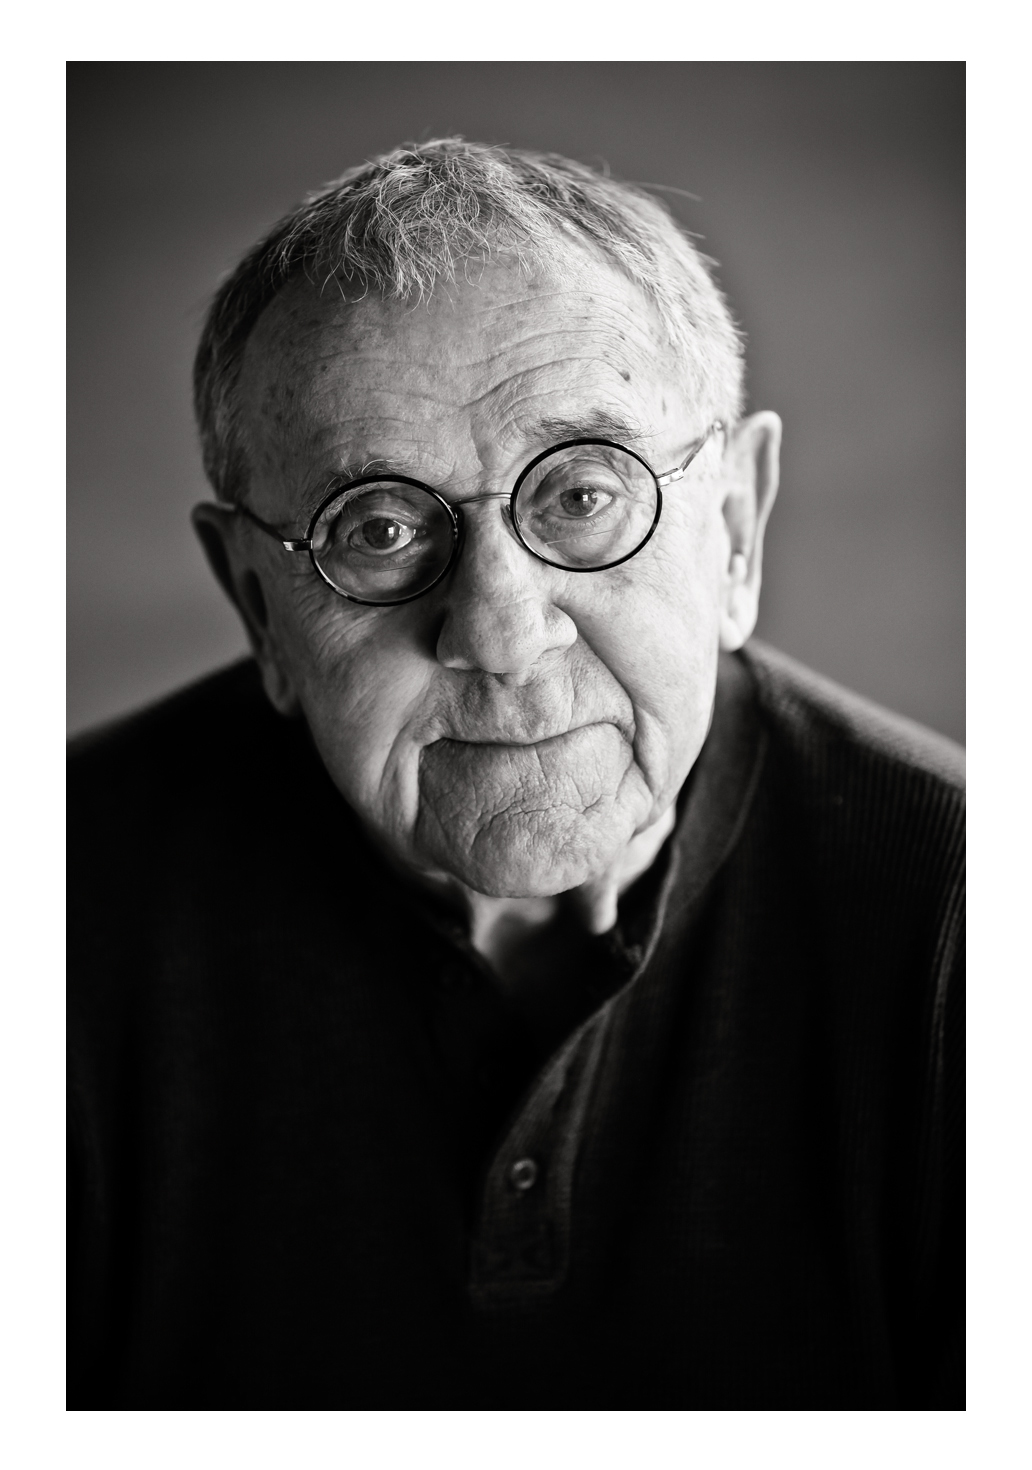 An elderly man wearing glasses faces the photographer with a warm smile while wearing a dark button-up shirt. Had a great time working on location